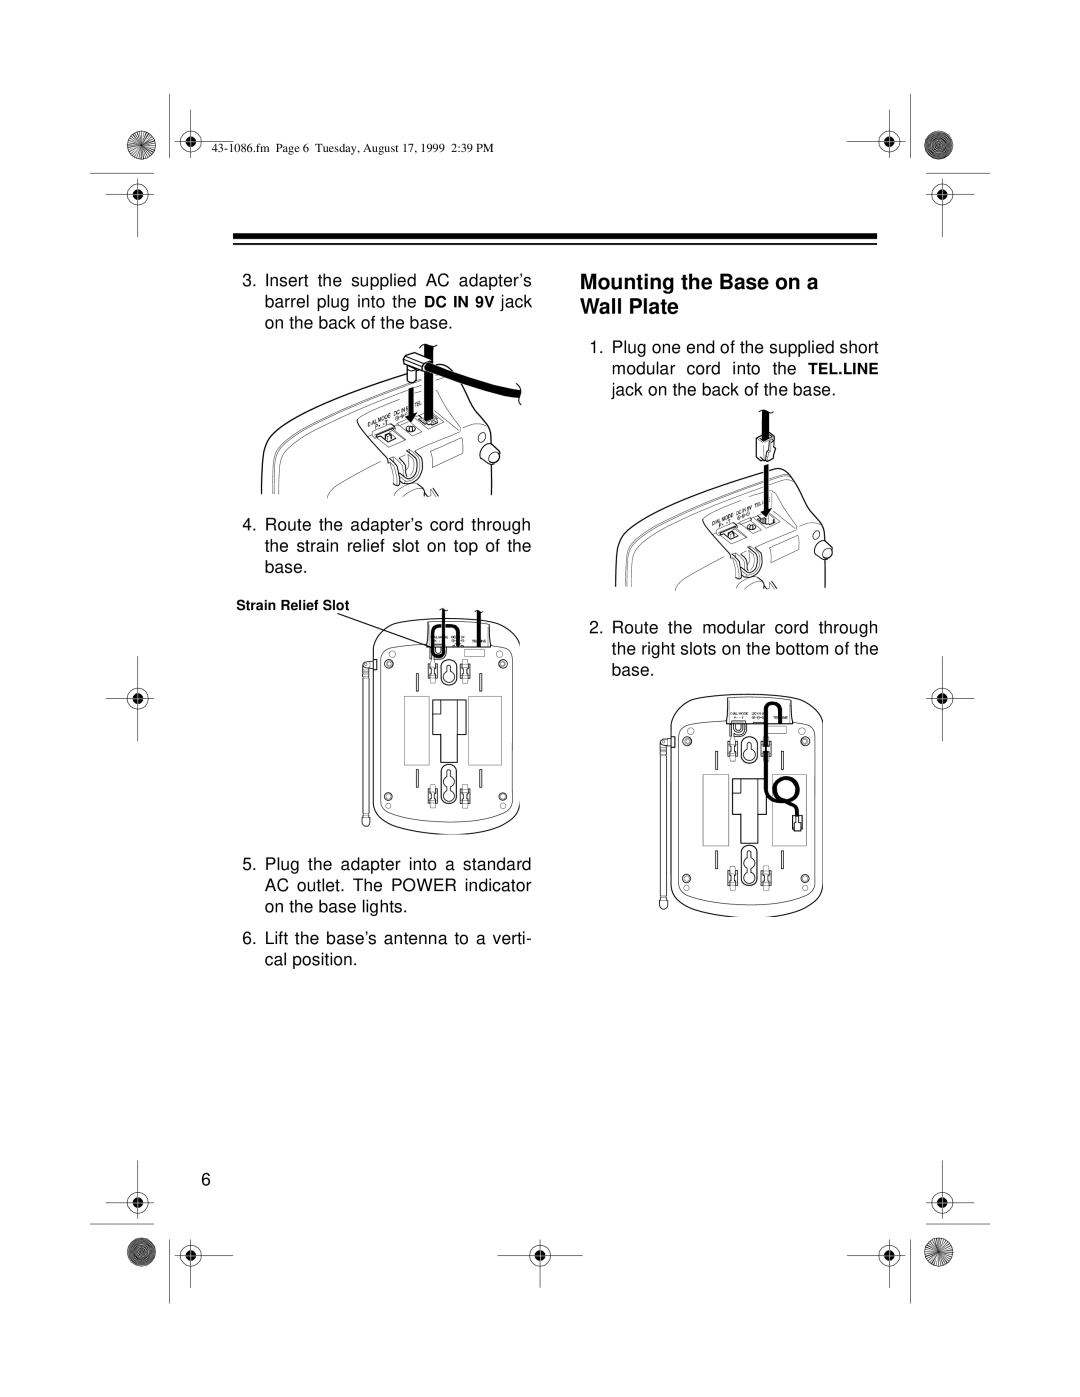 Radio Shack ET-916 owner manual Mounting the Base on a Wall Plate 